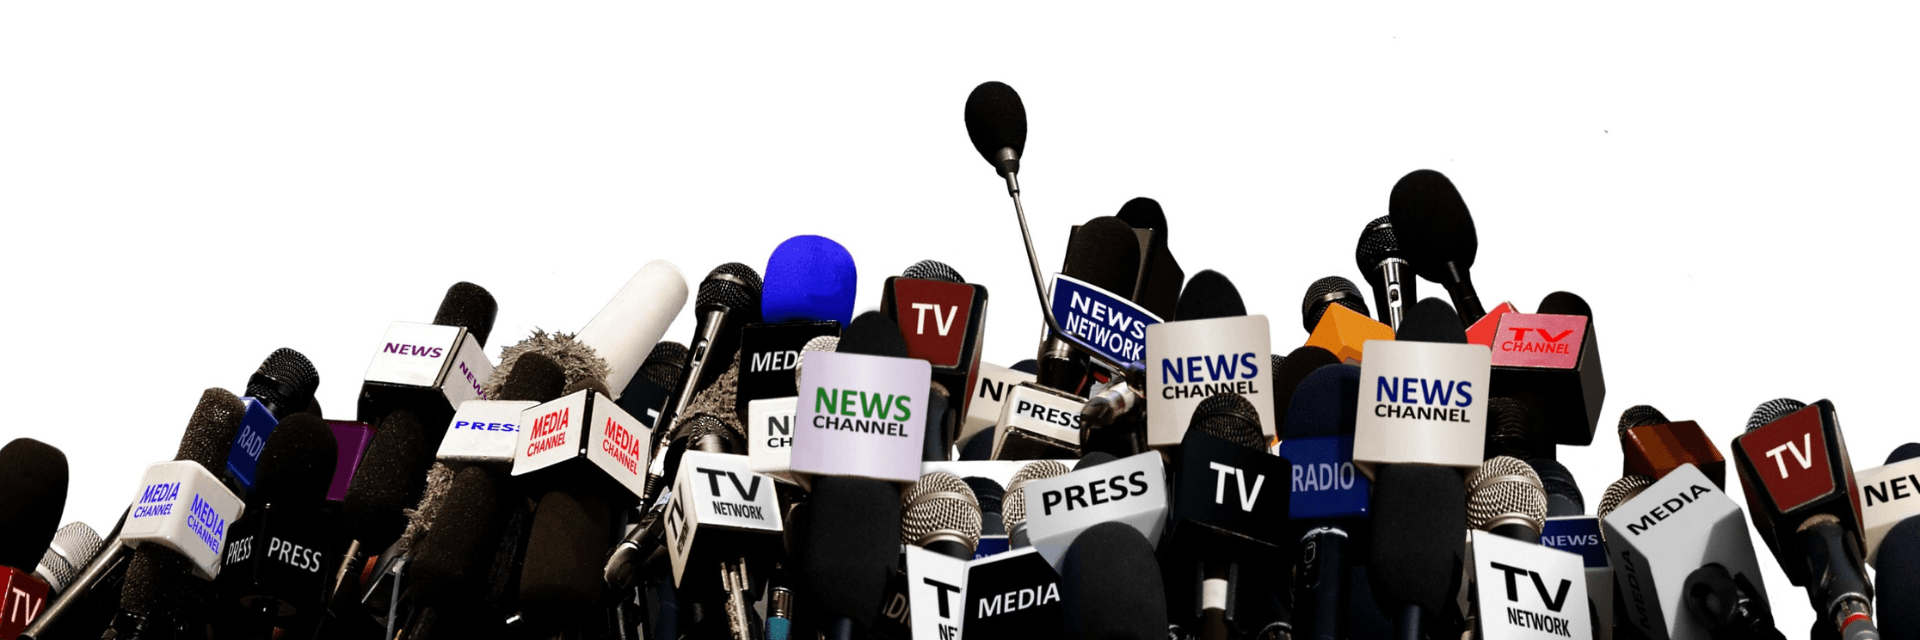 A photo of microphones that are labeled news, TV and media.